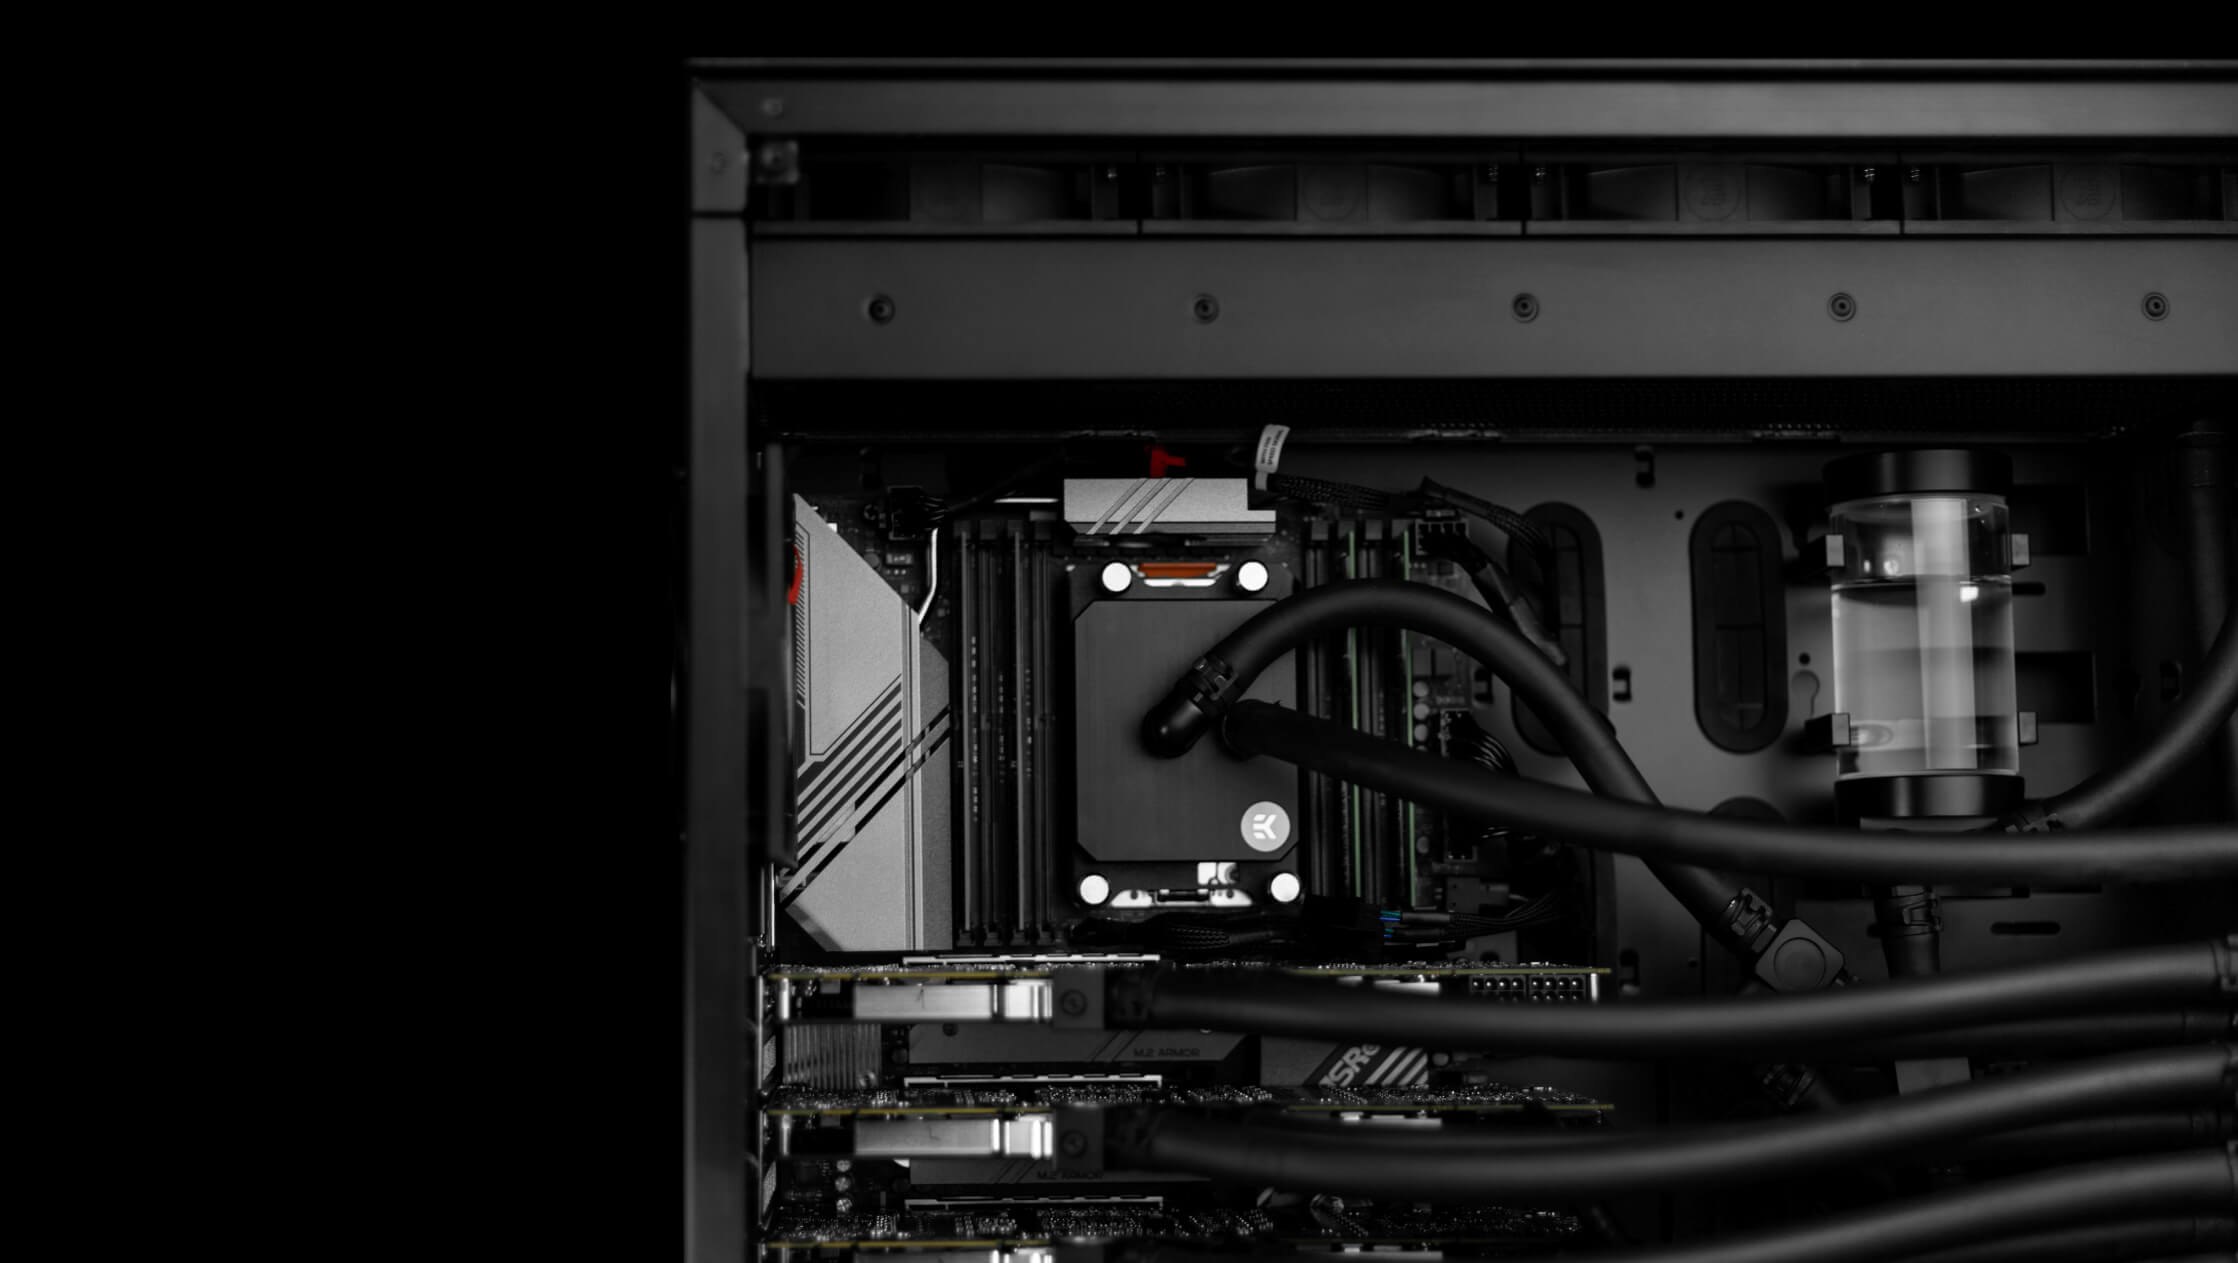 EK-Fluid Works Studio Series S5000 workstation with multiple GPUs – the ideal system for Houdini Virtual production